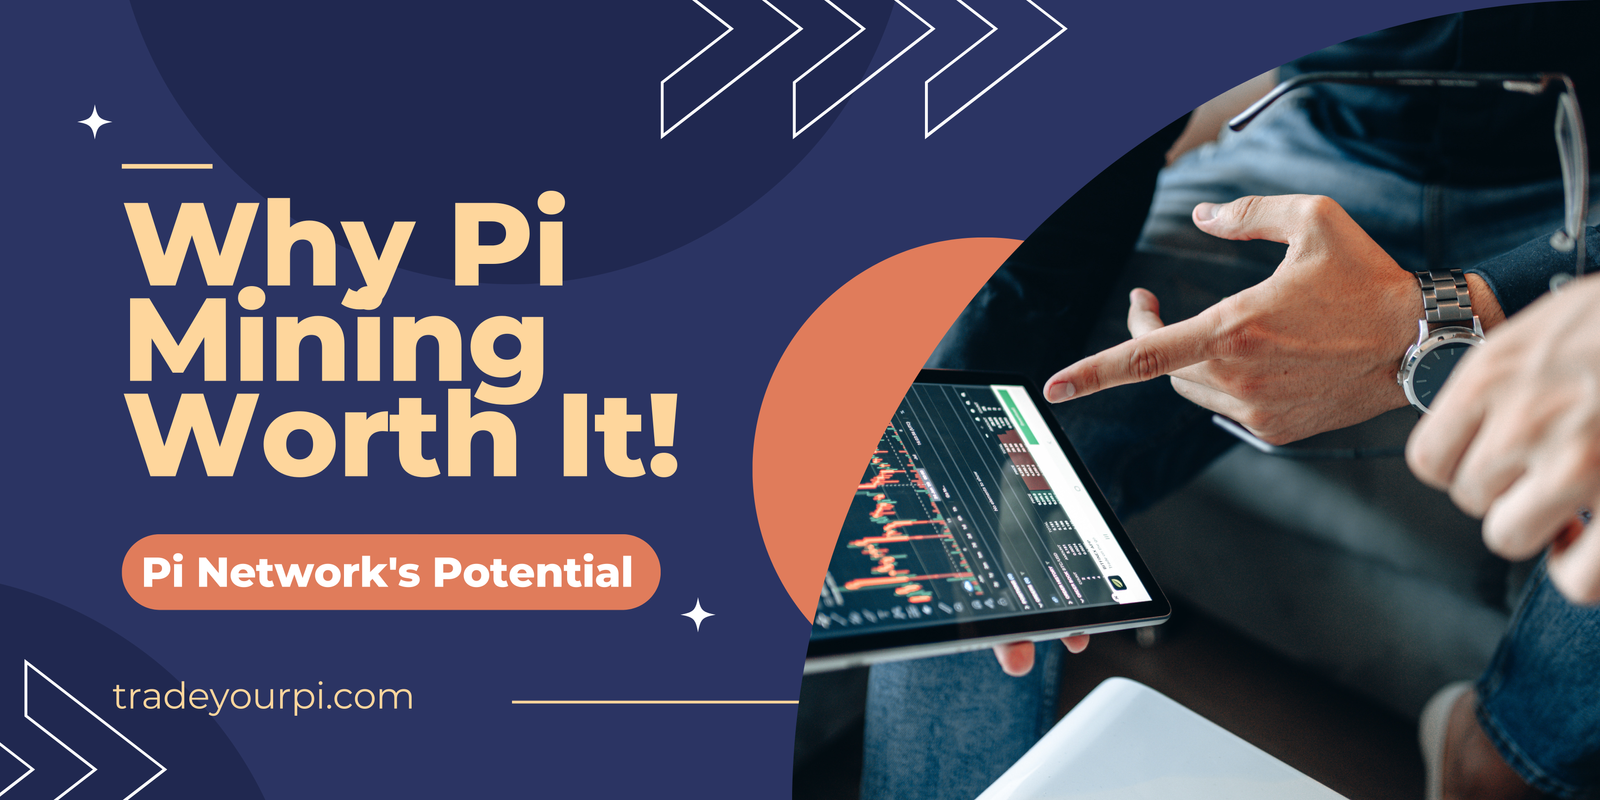 Why Pi Mining Worth It | Pi Network’s Potential